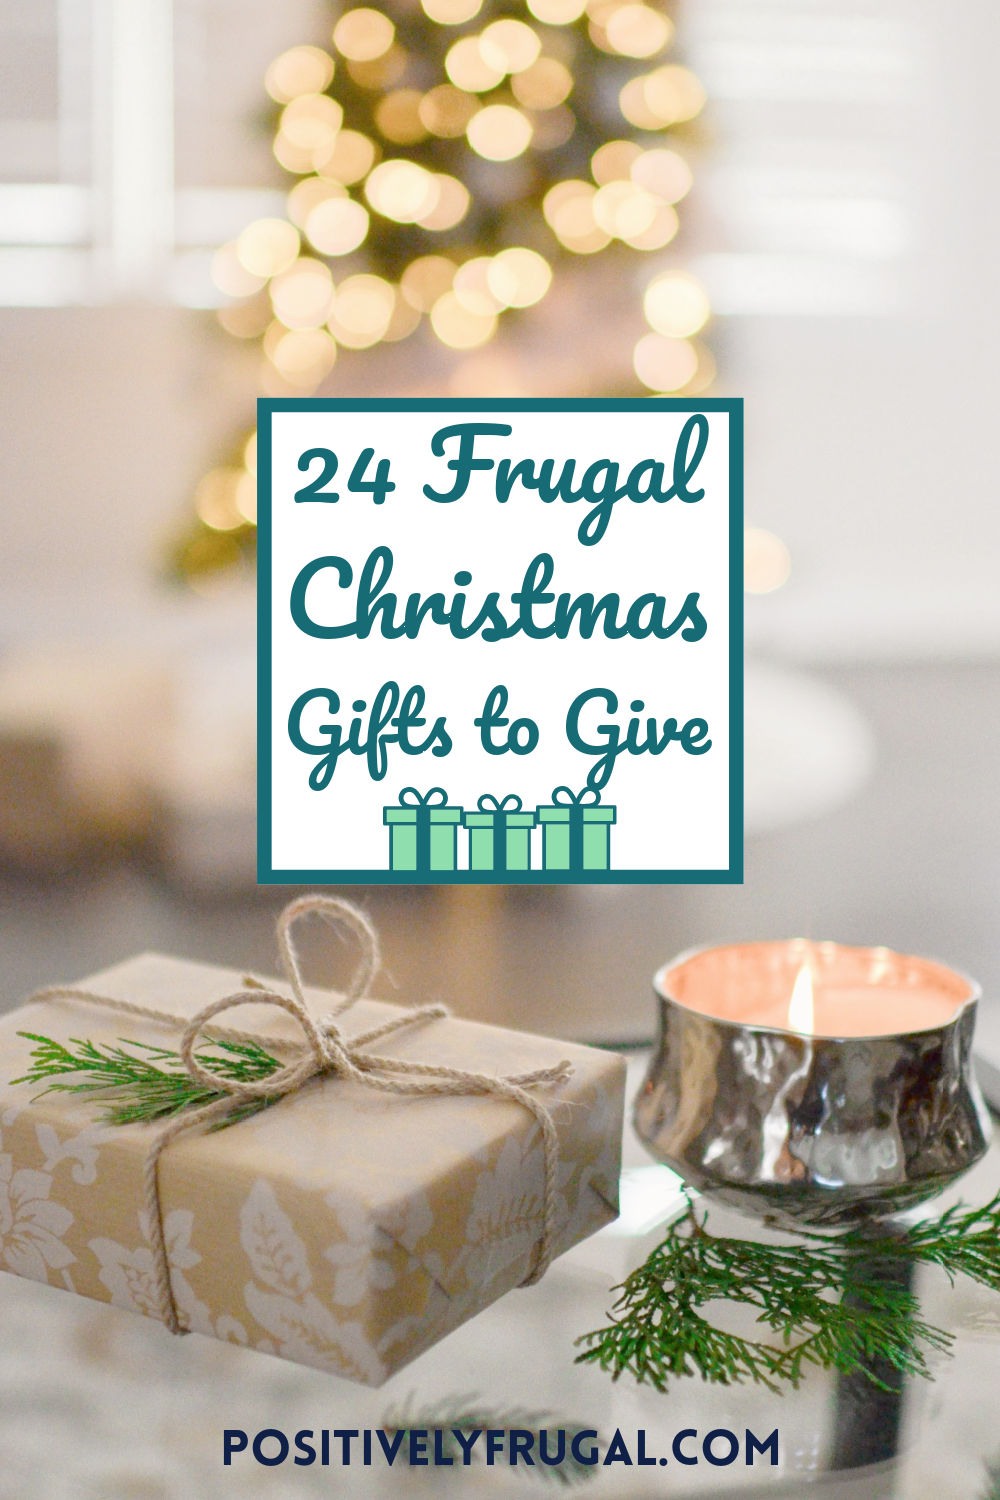 24 Frugal Christmas Gifts to Give by PositivelyFrugal.com